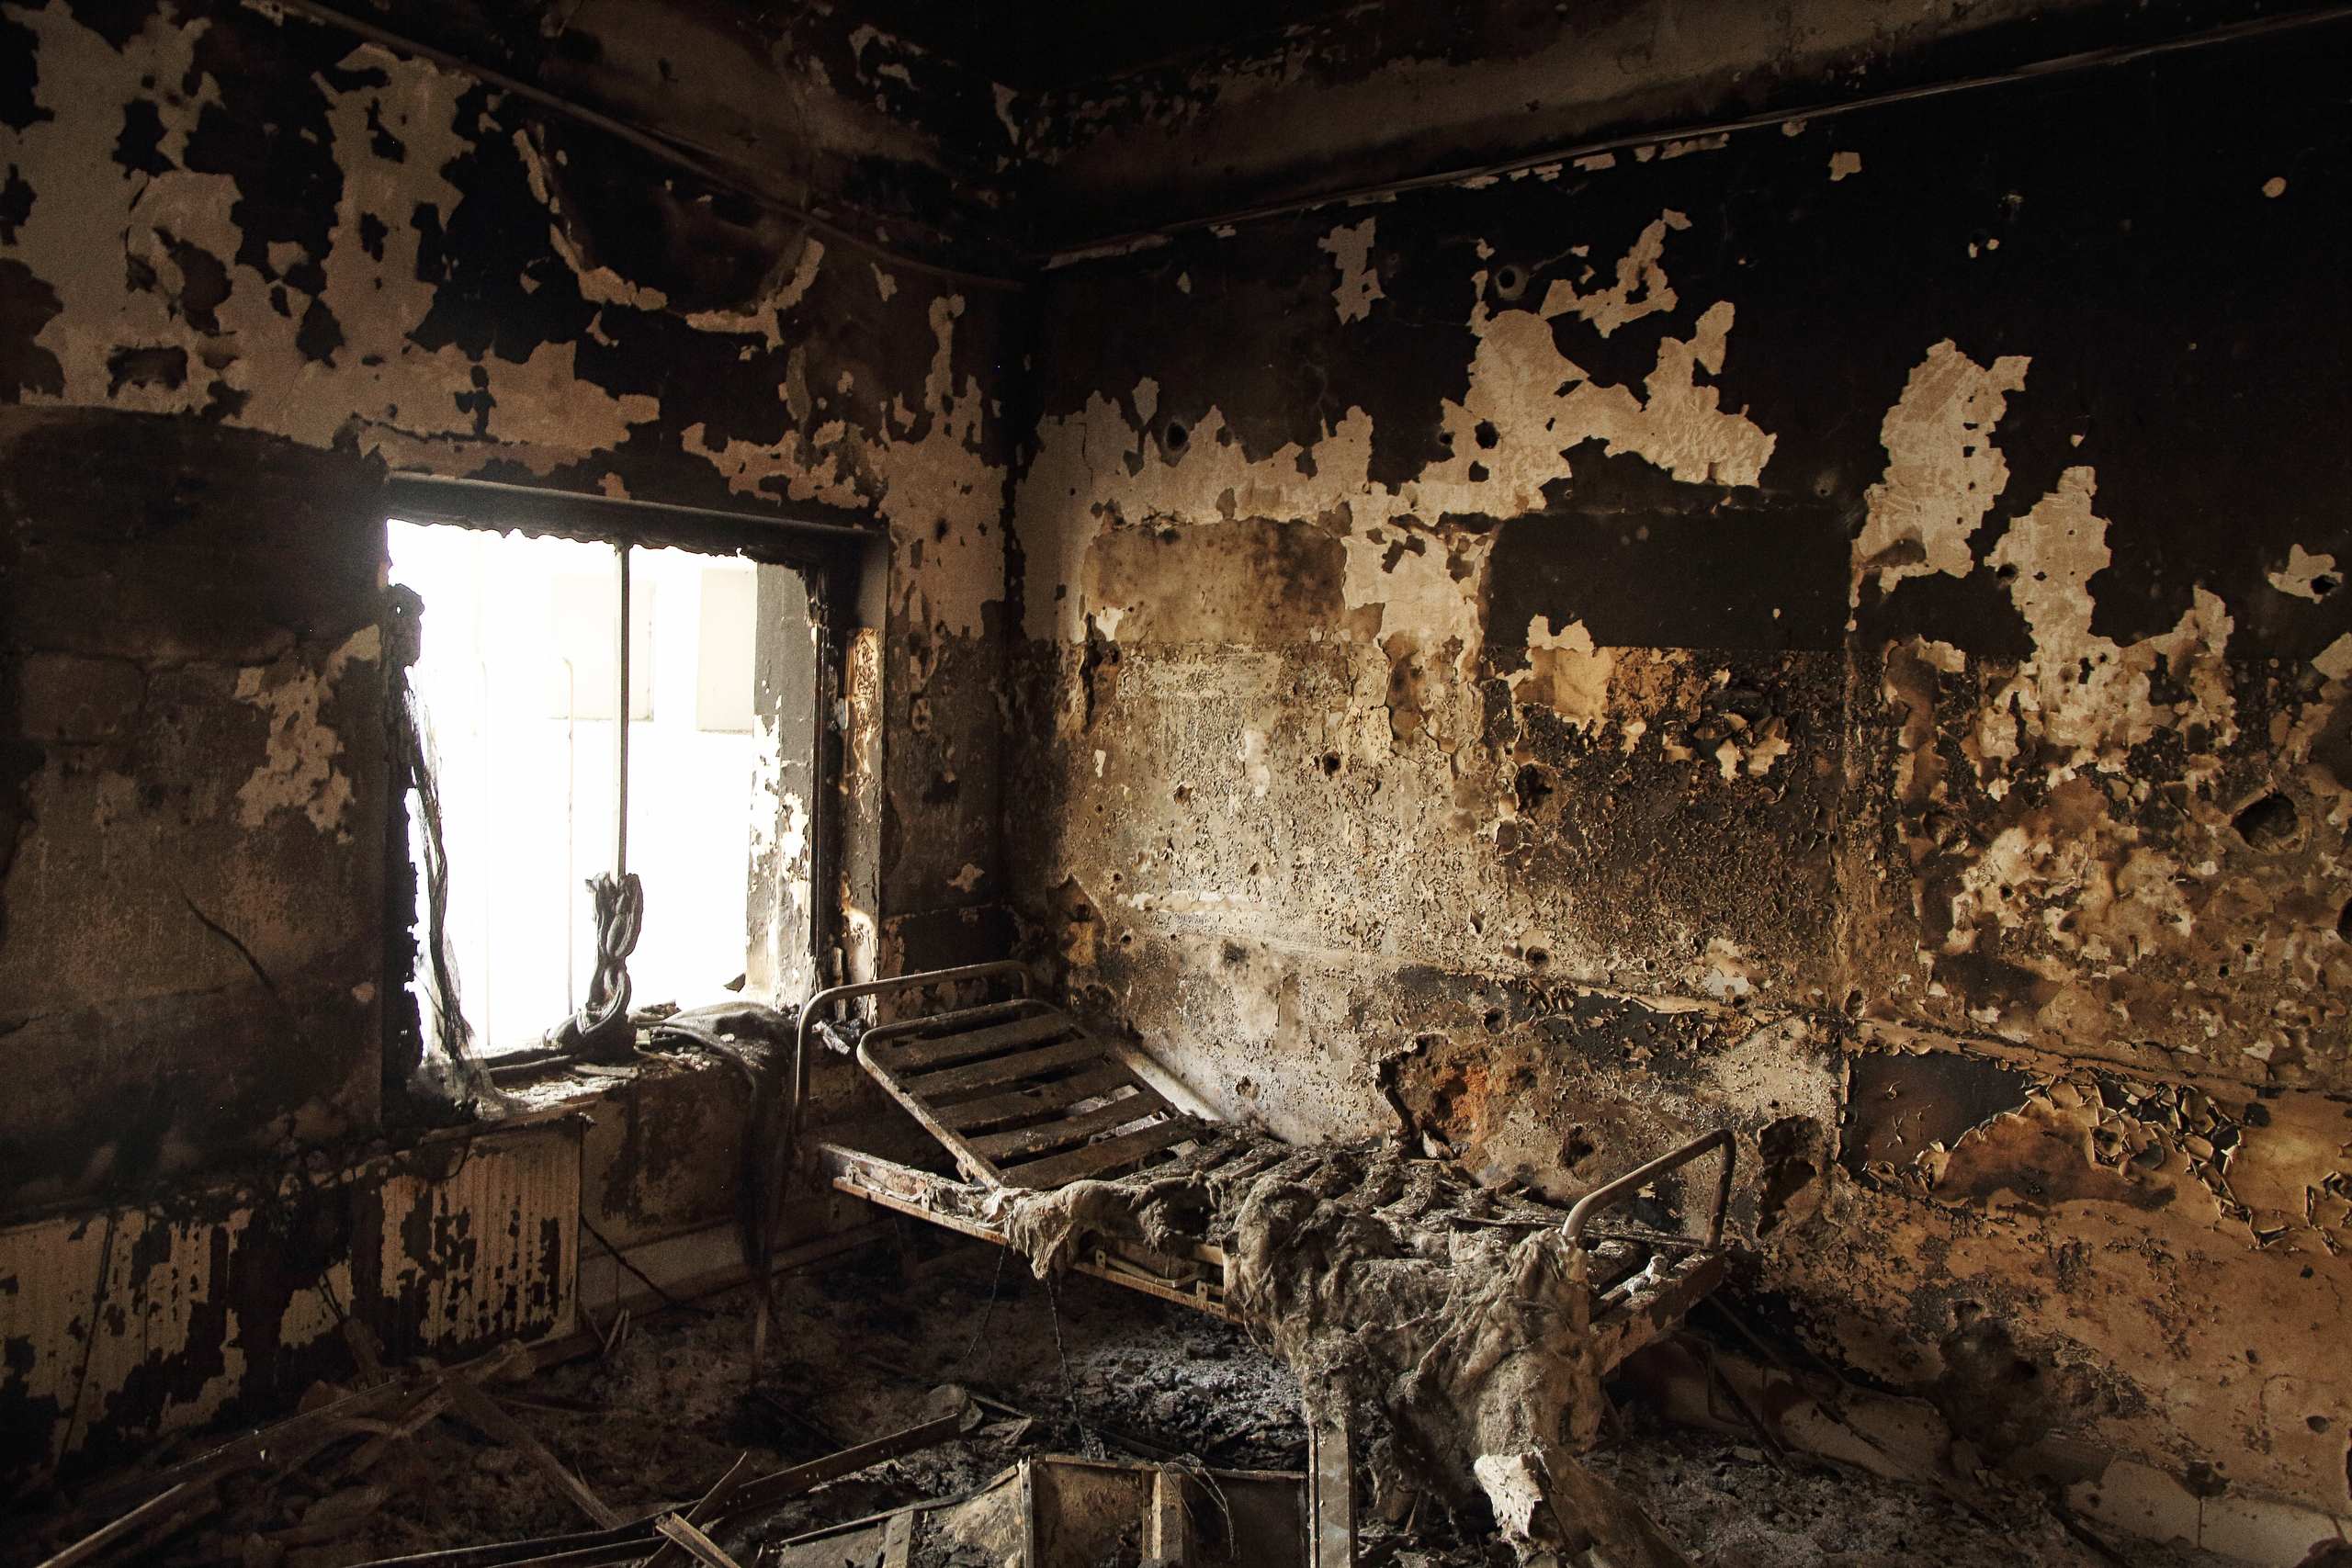 PHOTO: This photo shows the devastating destruction inside MSF/Doctors Without Borders hospital hit by U.S. air strikes in Kunduz, Afghanistan. 